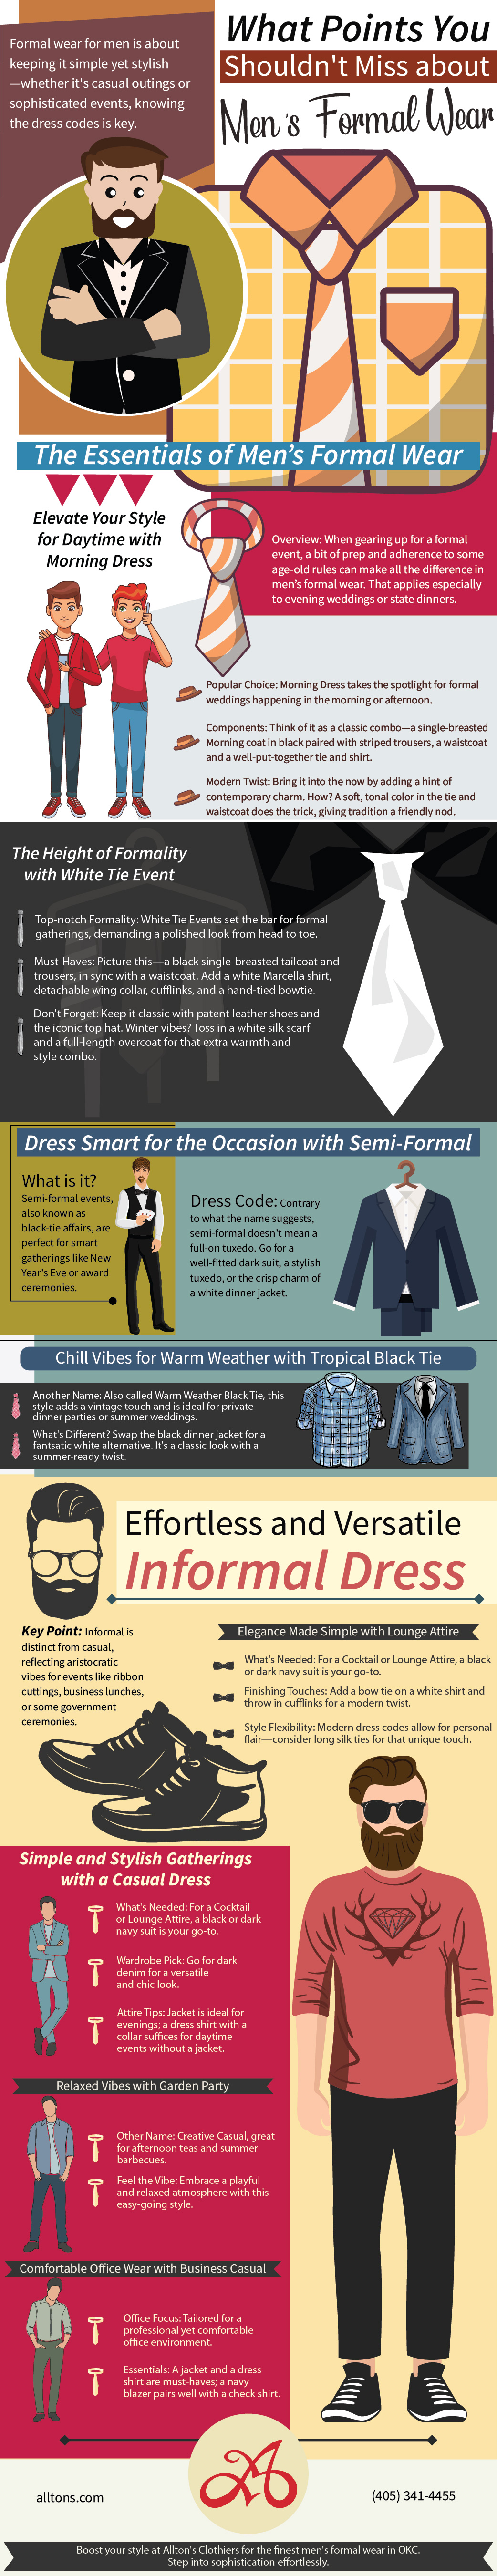 What Points You Shouldn't Miss About Men's Formal Wear